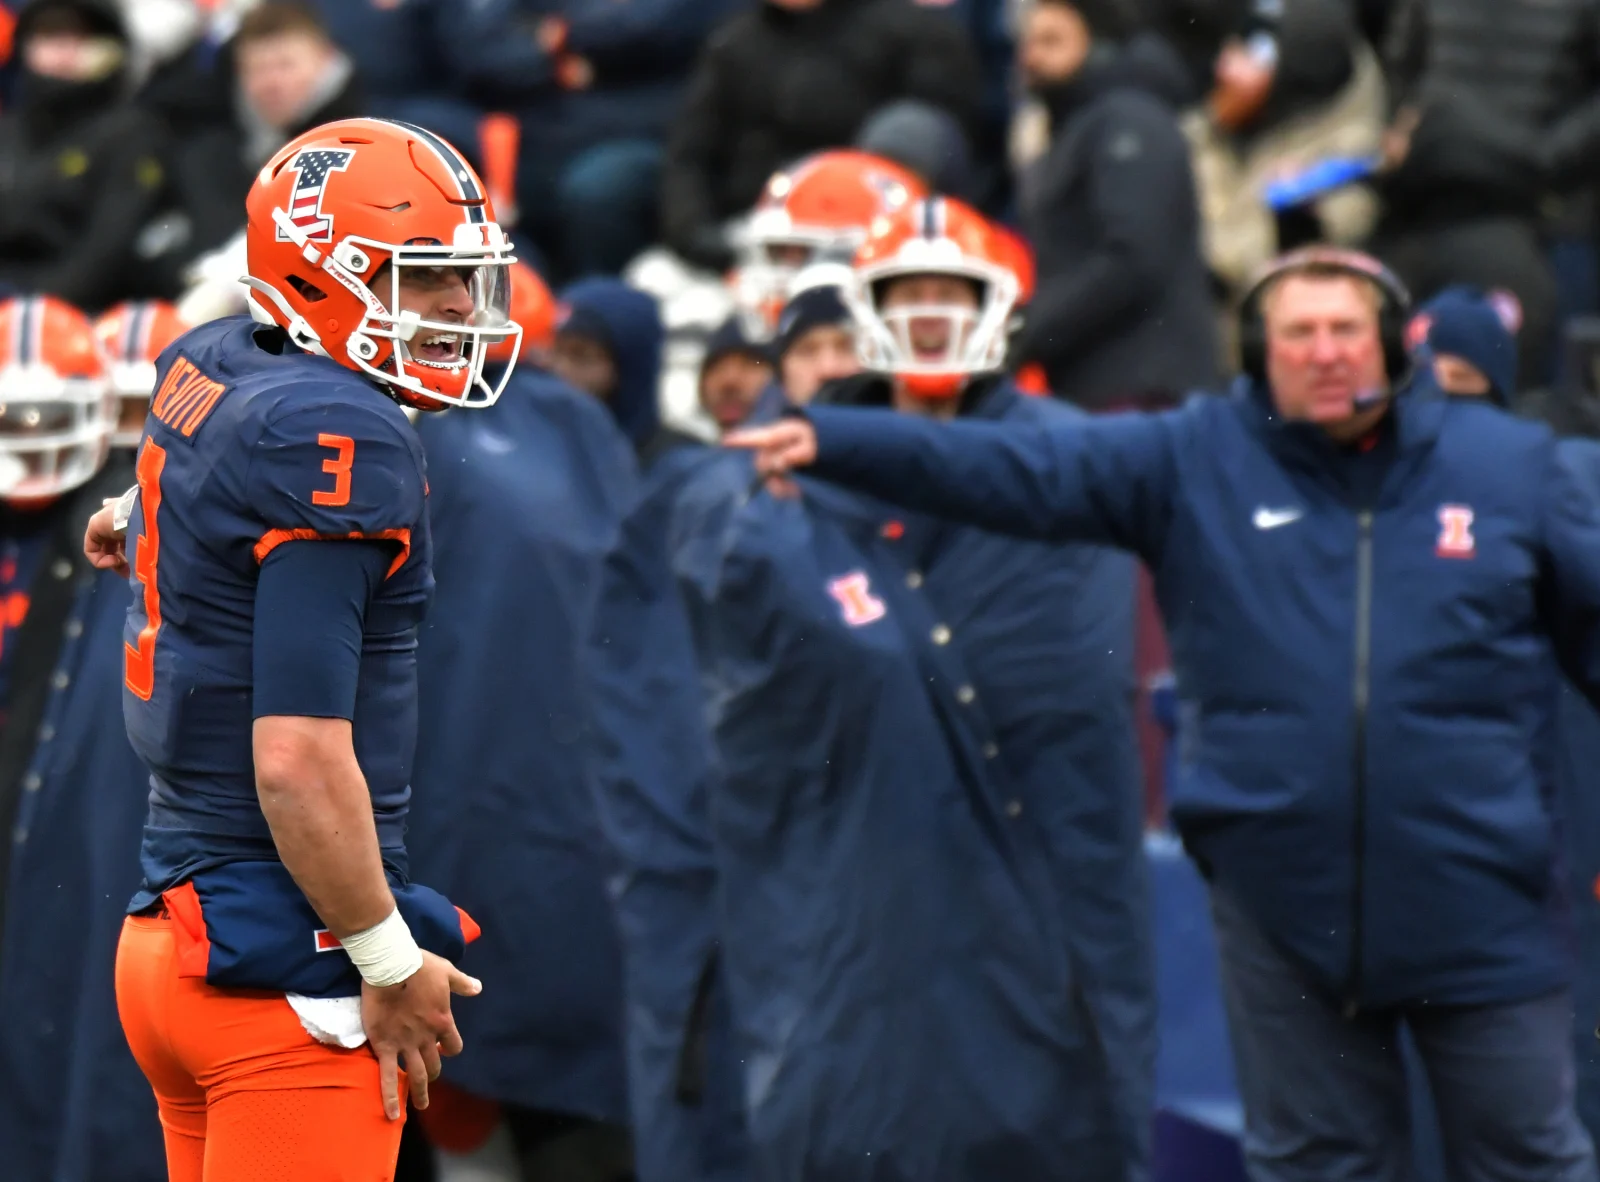 𝐆𝐚𝐦𝐞 𝟑 See you back at - Fighting Illini Football